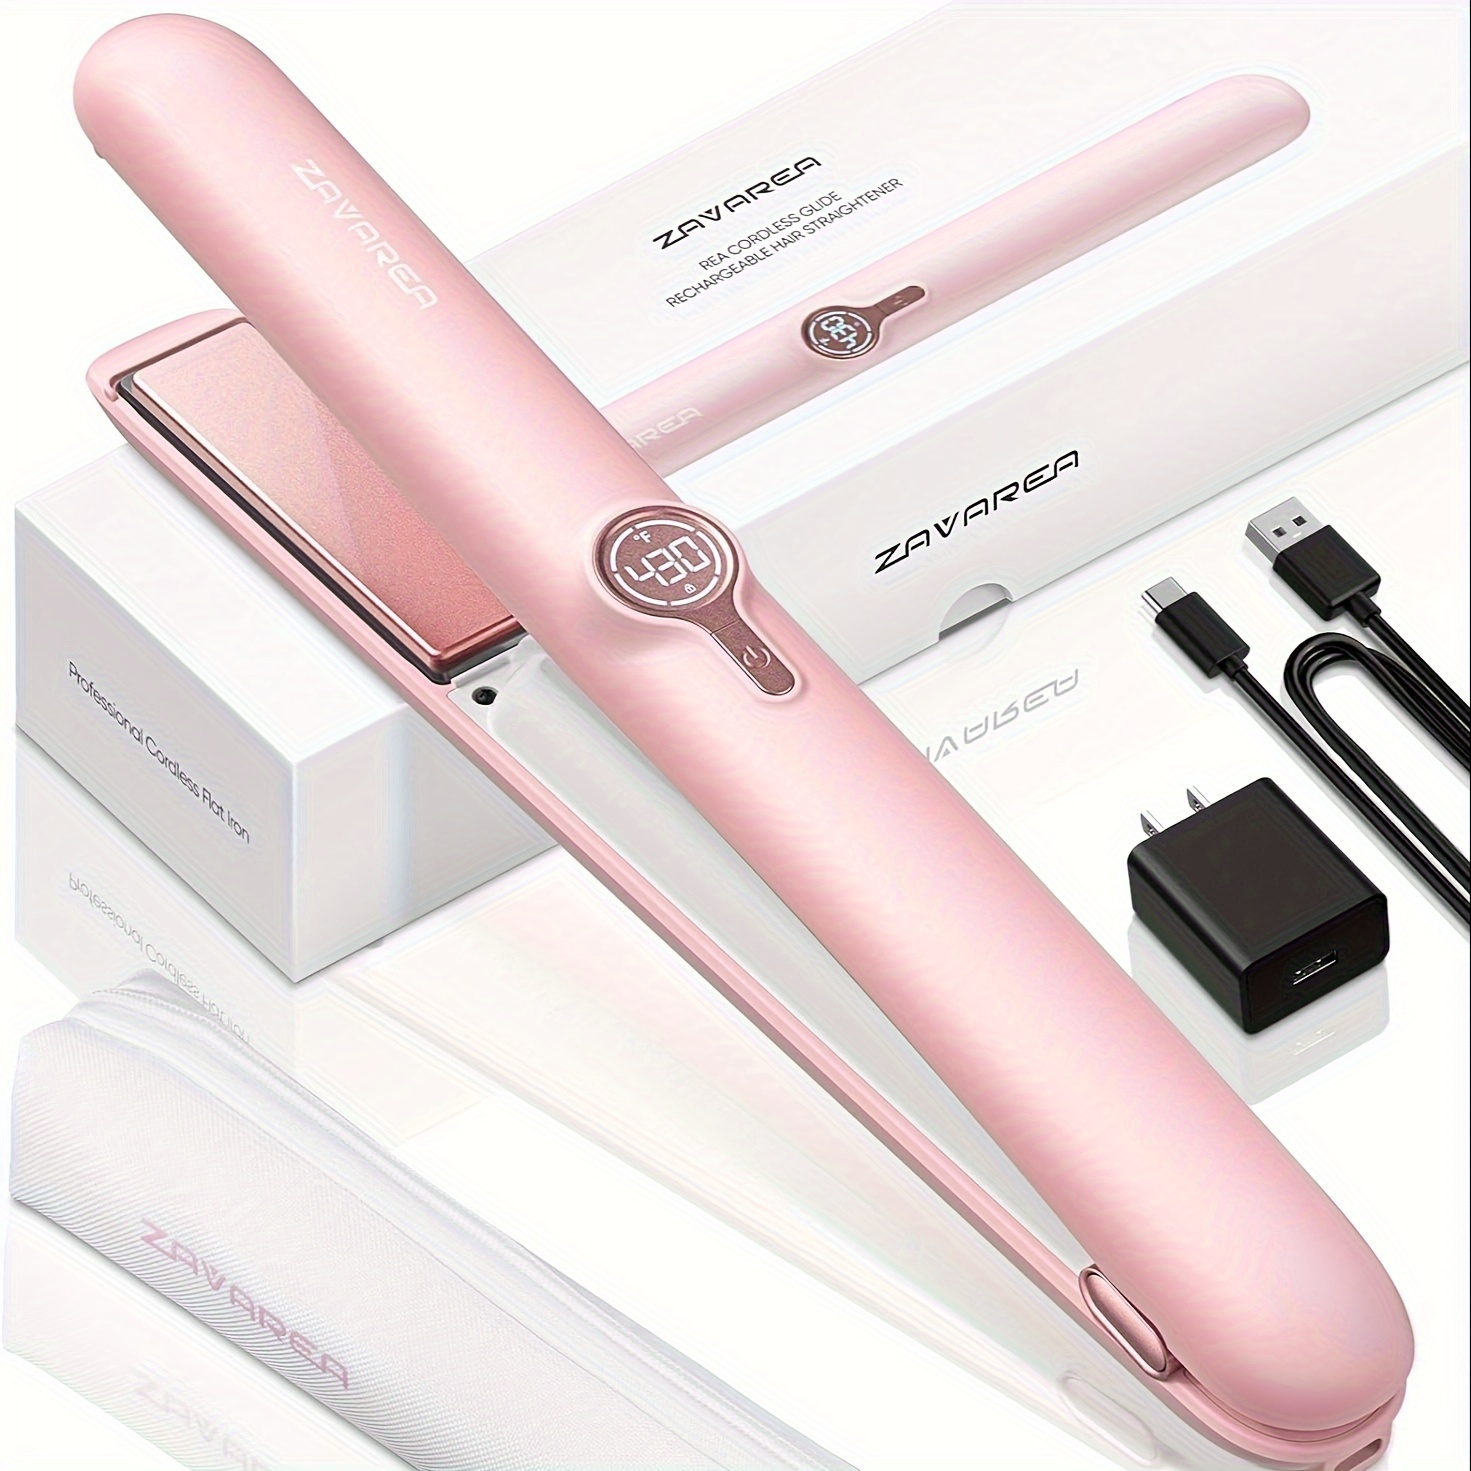 

2-in-1 Ceramic Straightens & Curls For Travel, Led Display Screen, Ceramic Coated Plates, Fast Heating